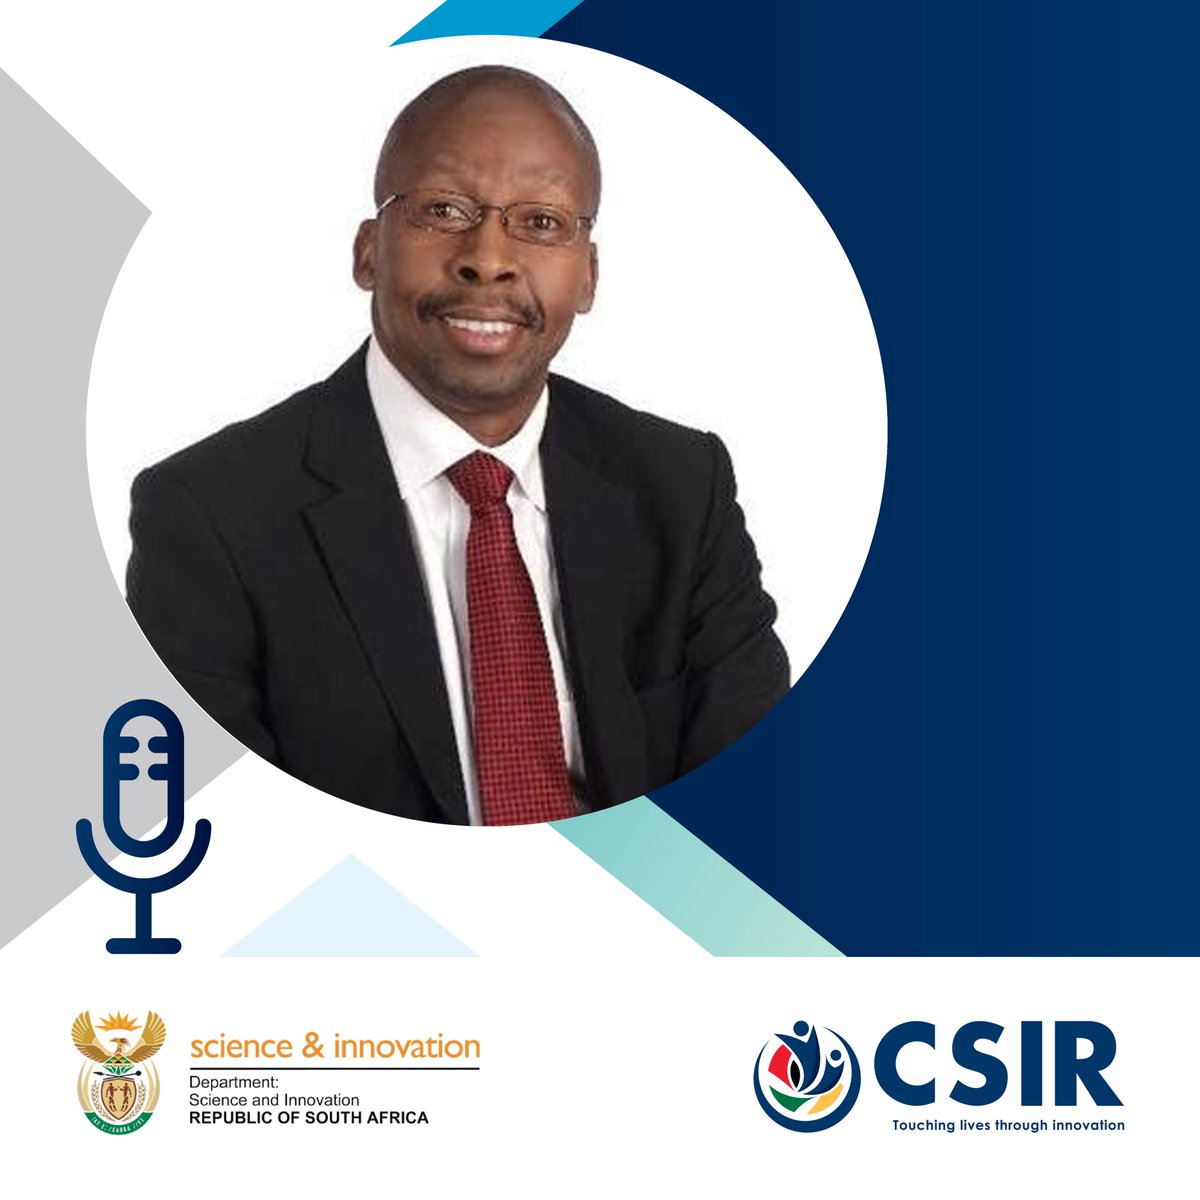 Catch #TeamCSIR Group Executive Dr Sandile Malinga today between 6:00am and 9:00am on SABC Morning Live as he speaks about the role of the CSIR at #SAelections24. Don't miss it!